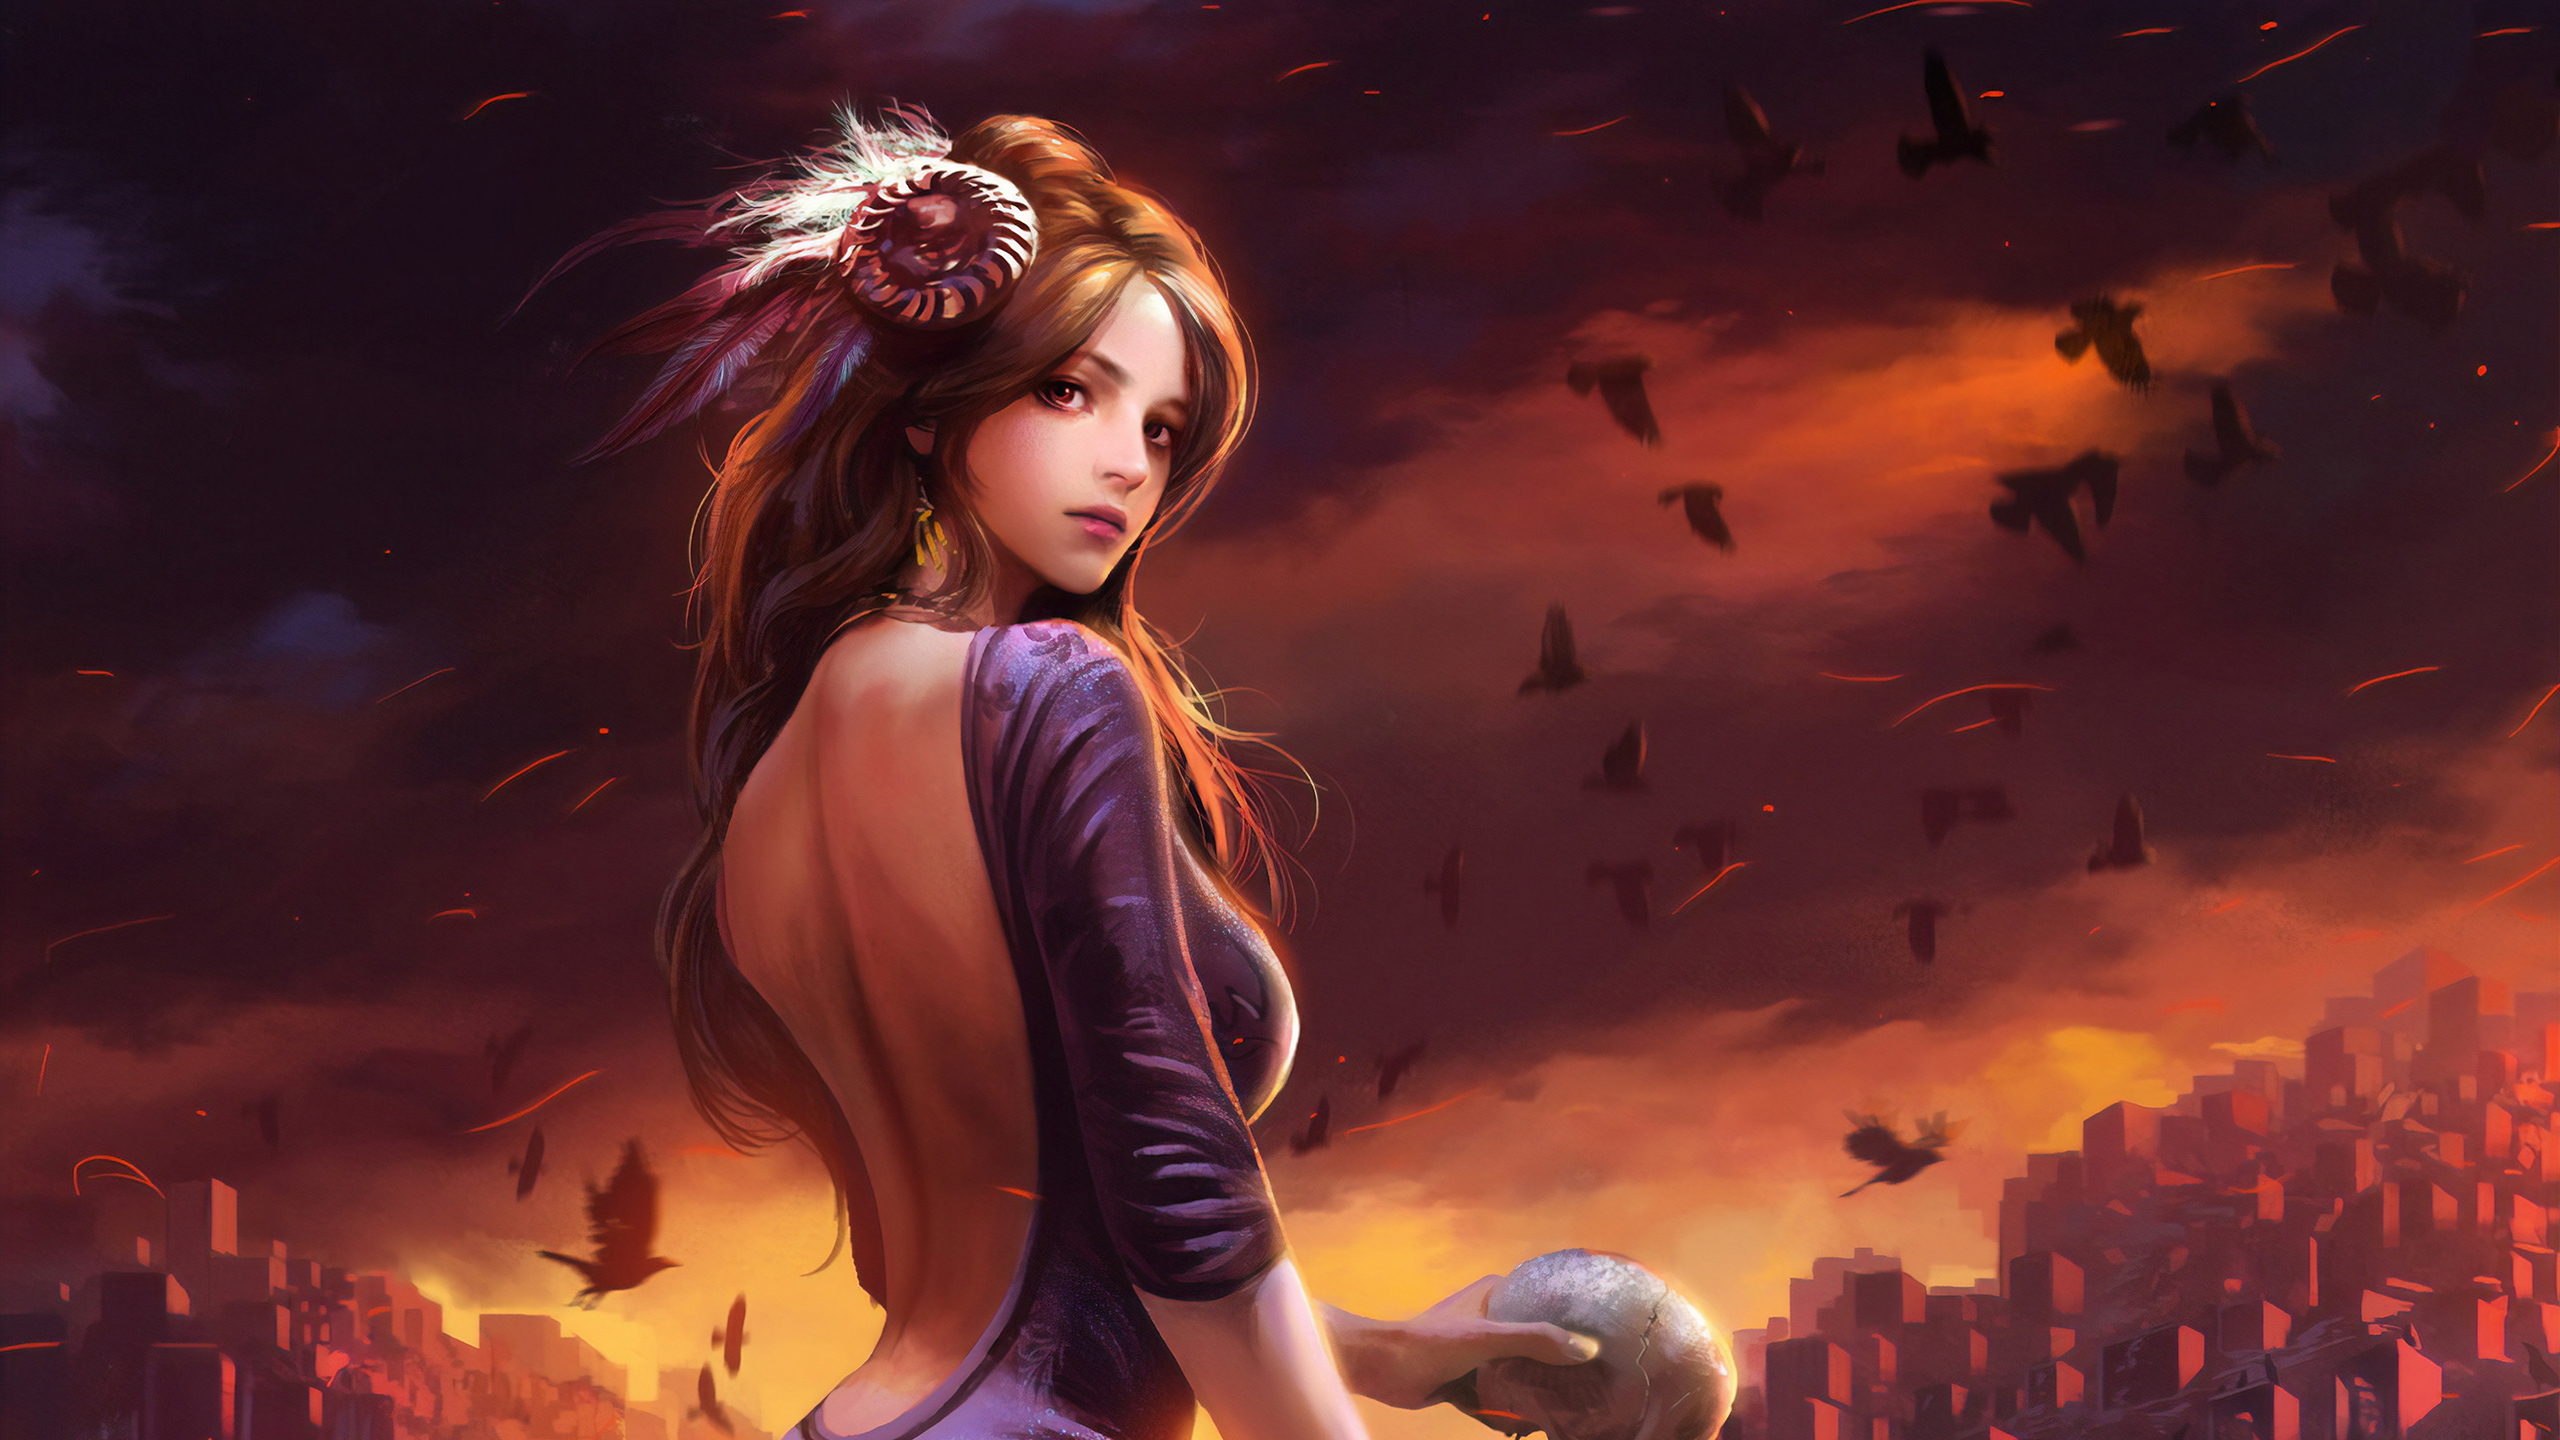 legend of the cryptids HD wallpaper, background